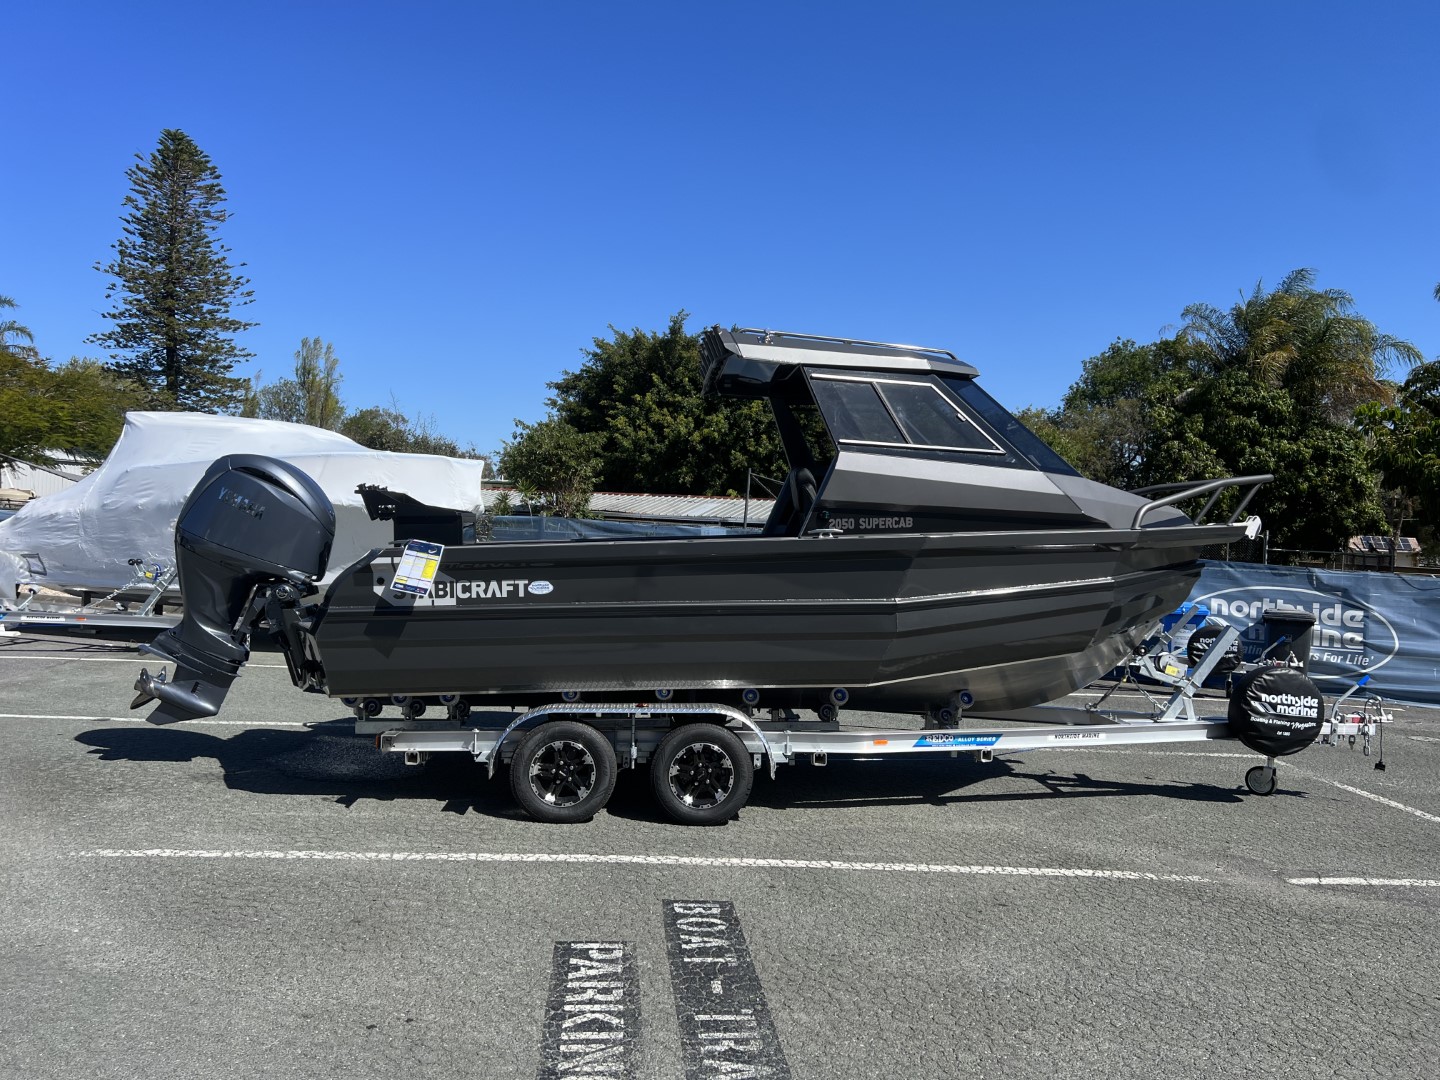 Sold - 2050 Supercab - Stabicraft Boats